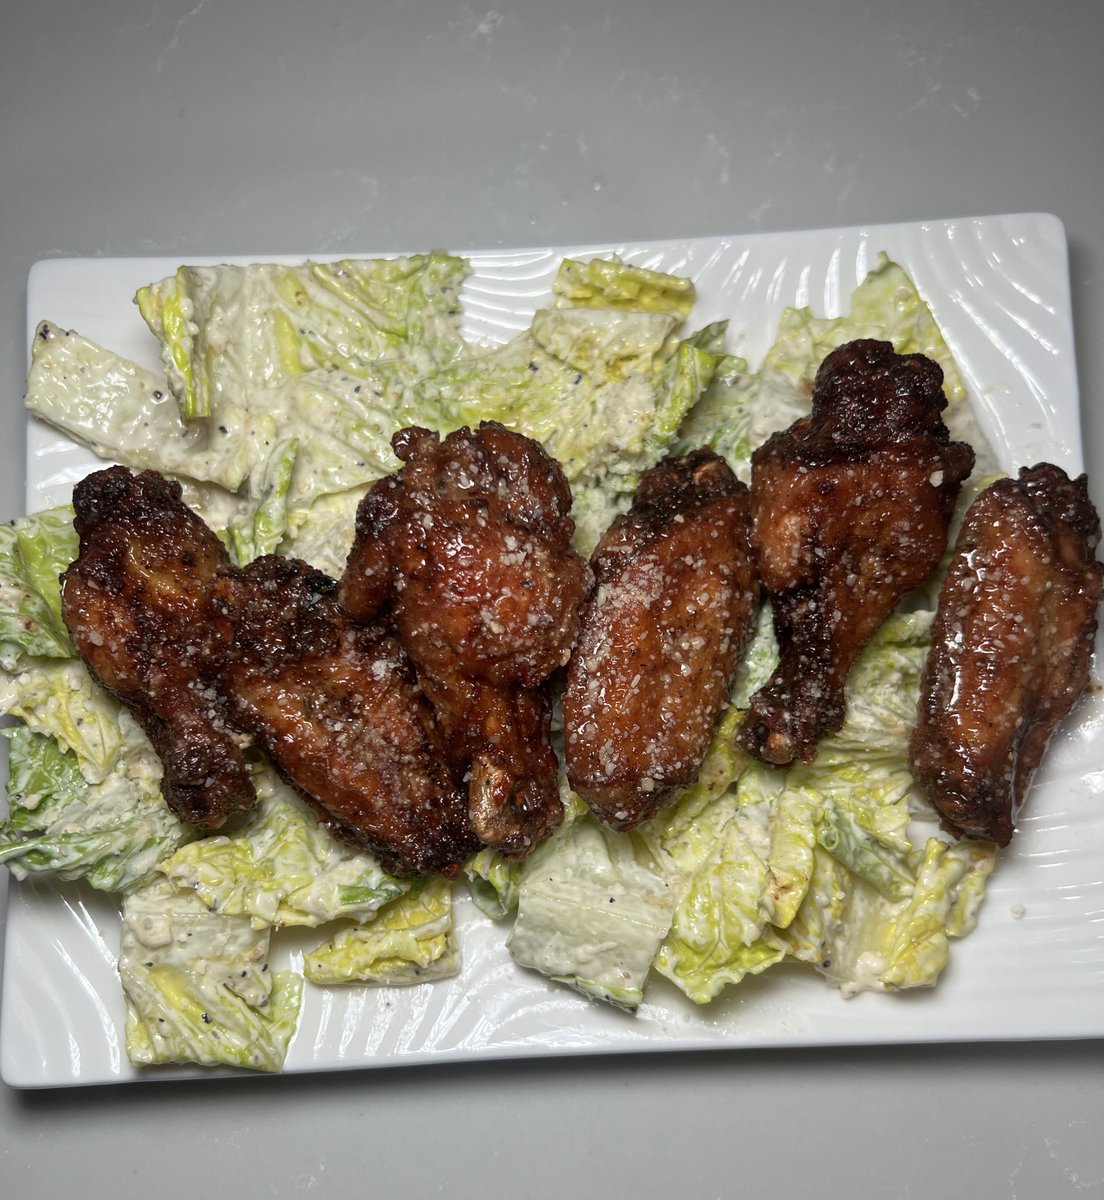 I made some chicken Caesar wings and wow